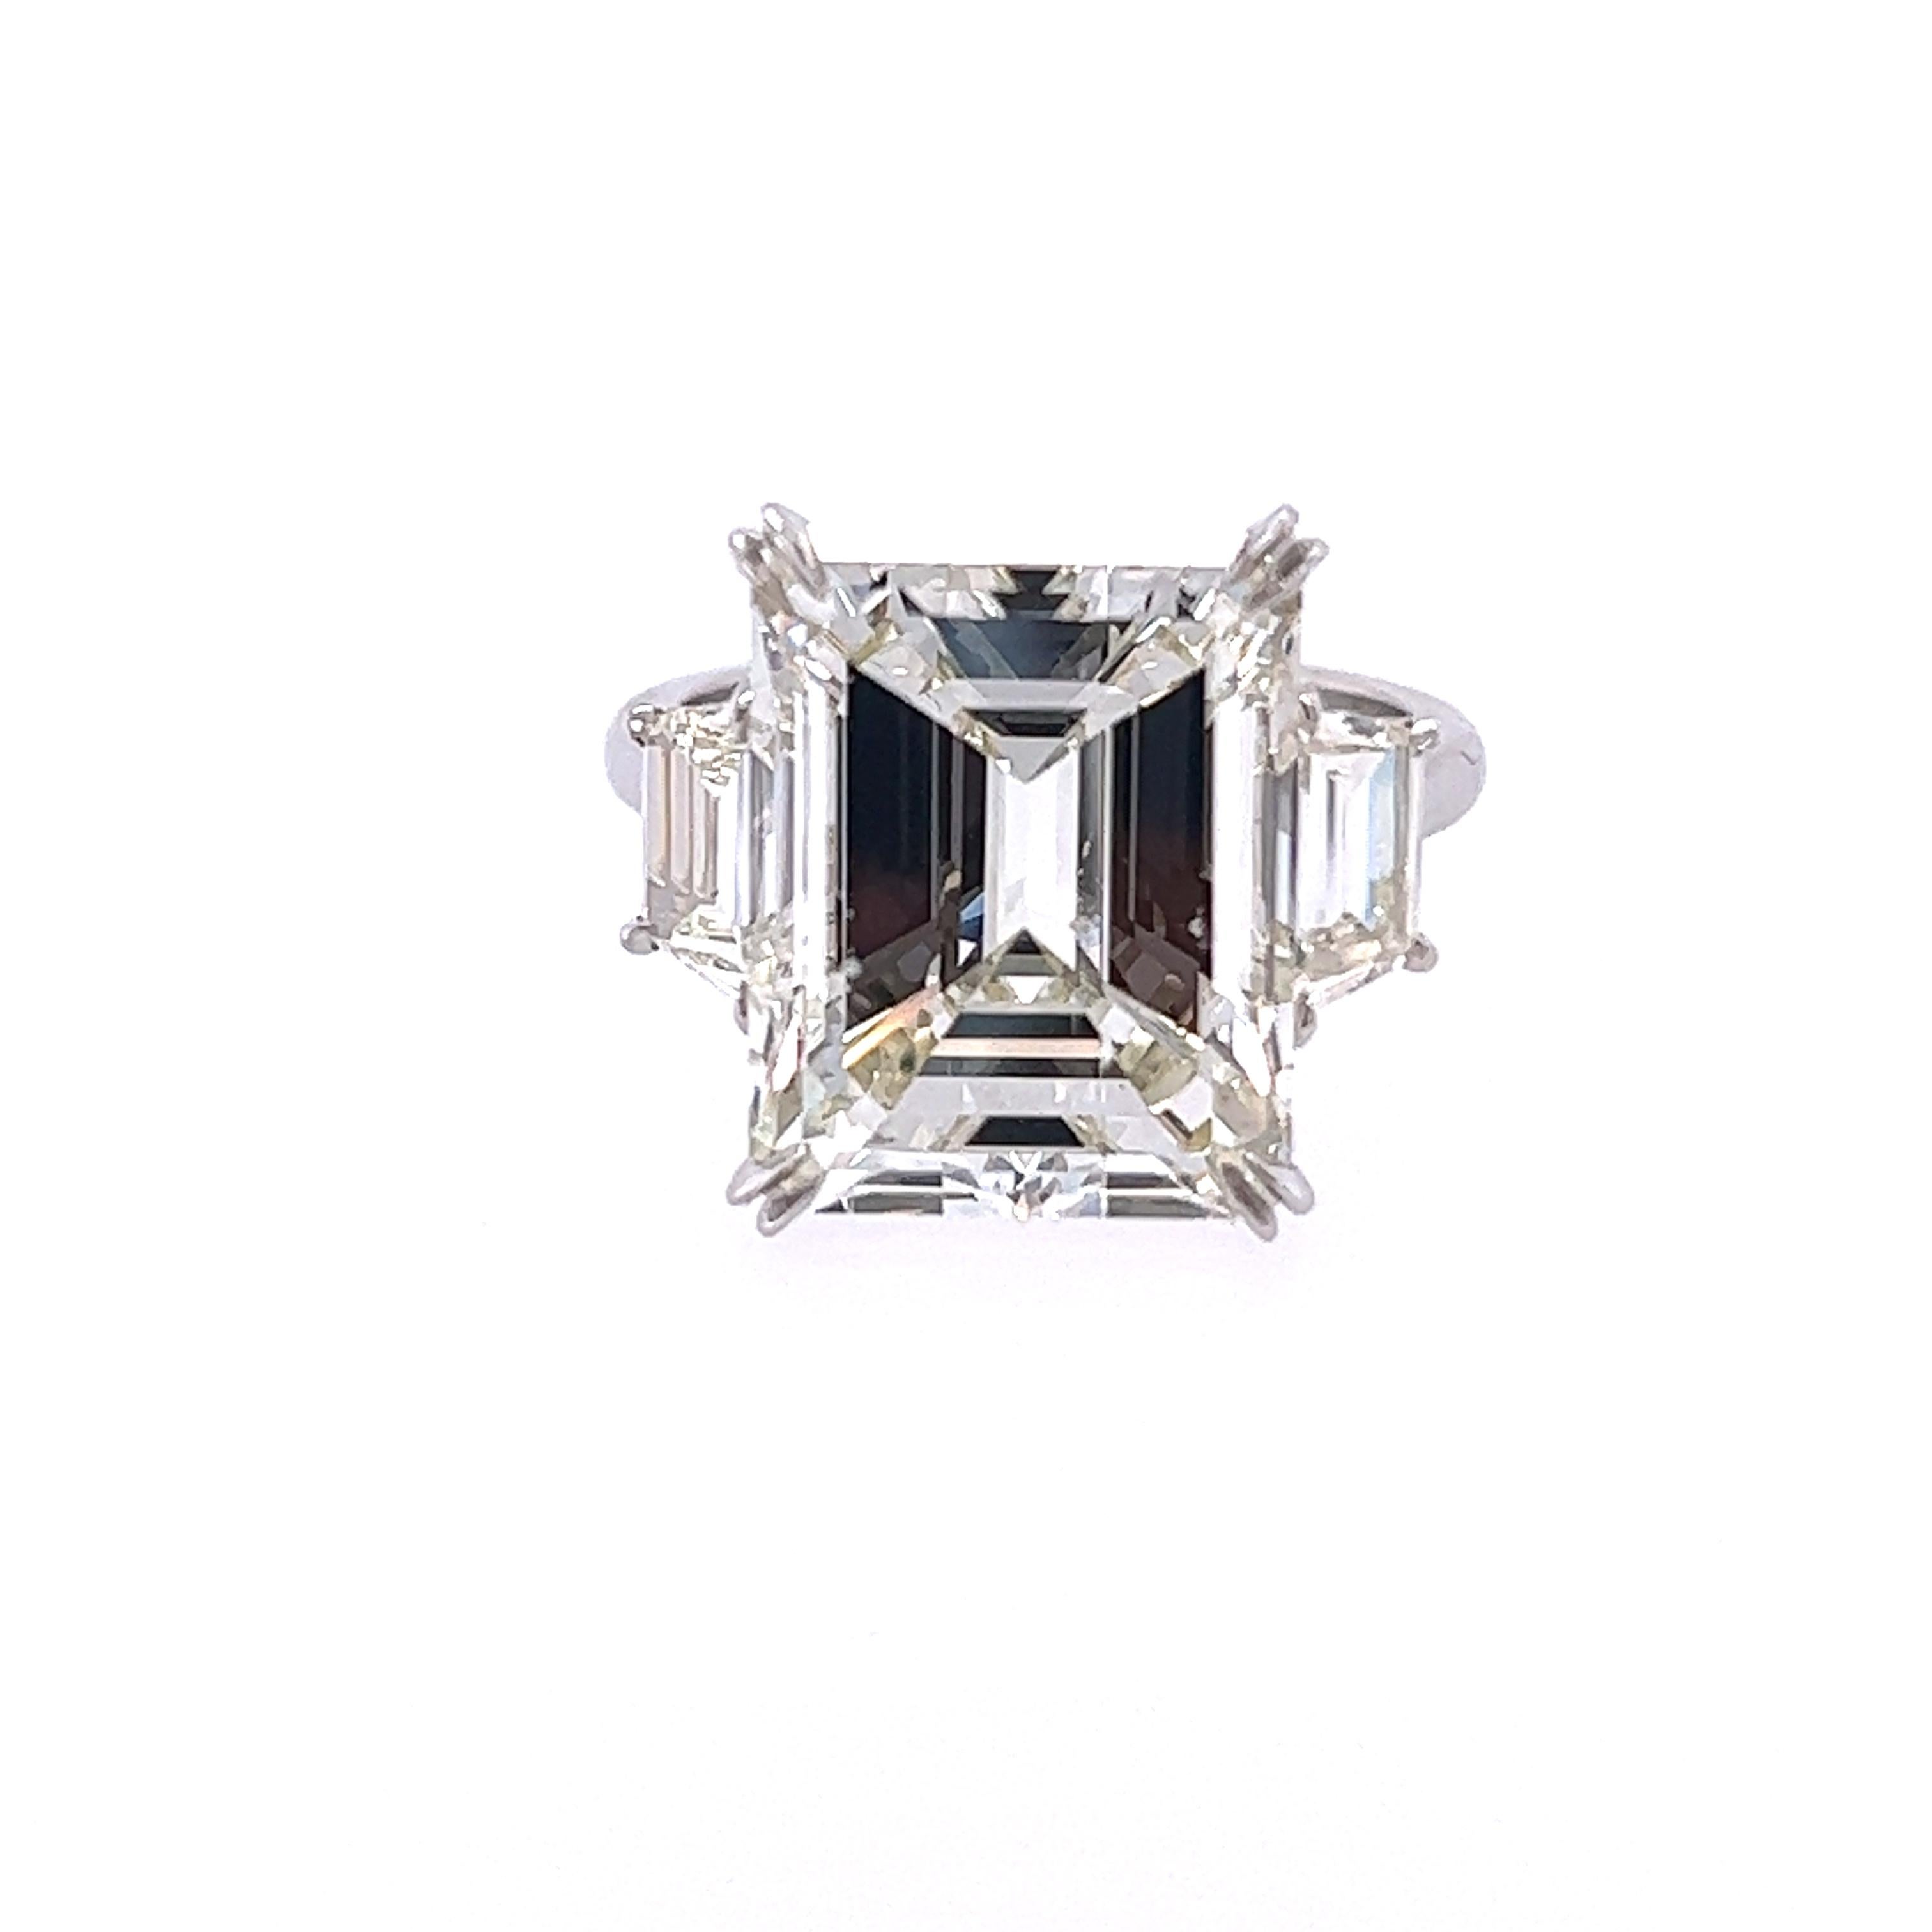 Rosenberg Diamonds & Co. 10.07 carat Emerald Cut L color SI2 clarity is accompanied by a GIA certificate. This spectacular Emerald is full of fire and it is set in a handmade platinum setting with perfectly matched pair of trapezoid side stones